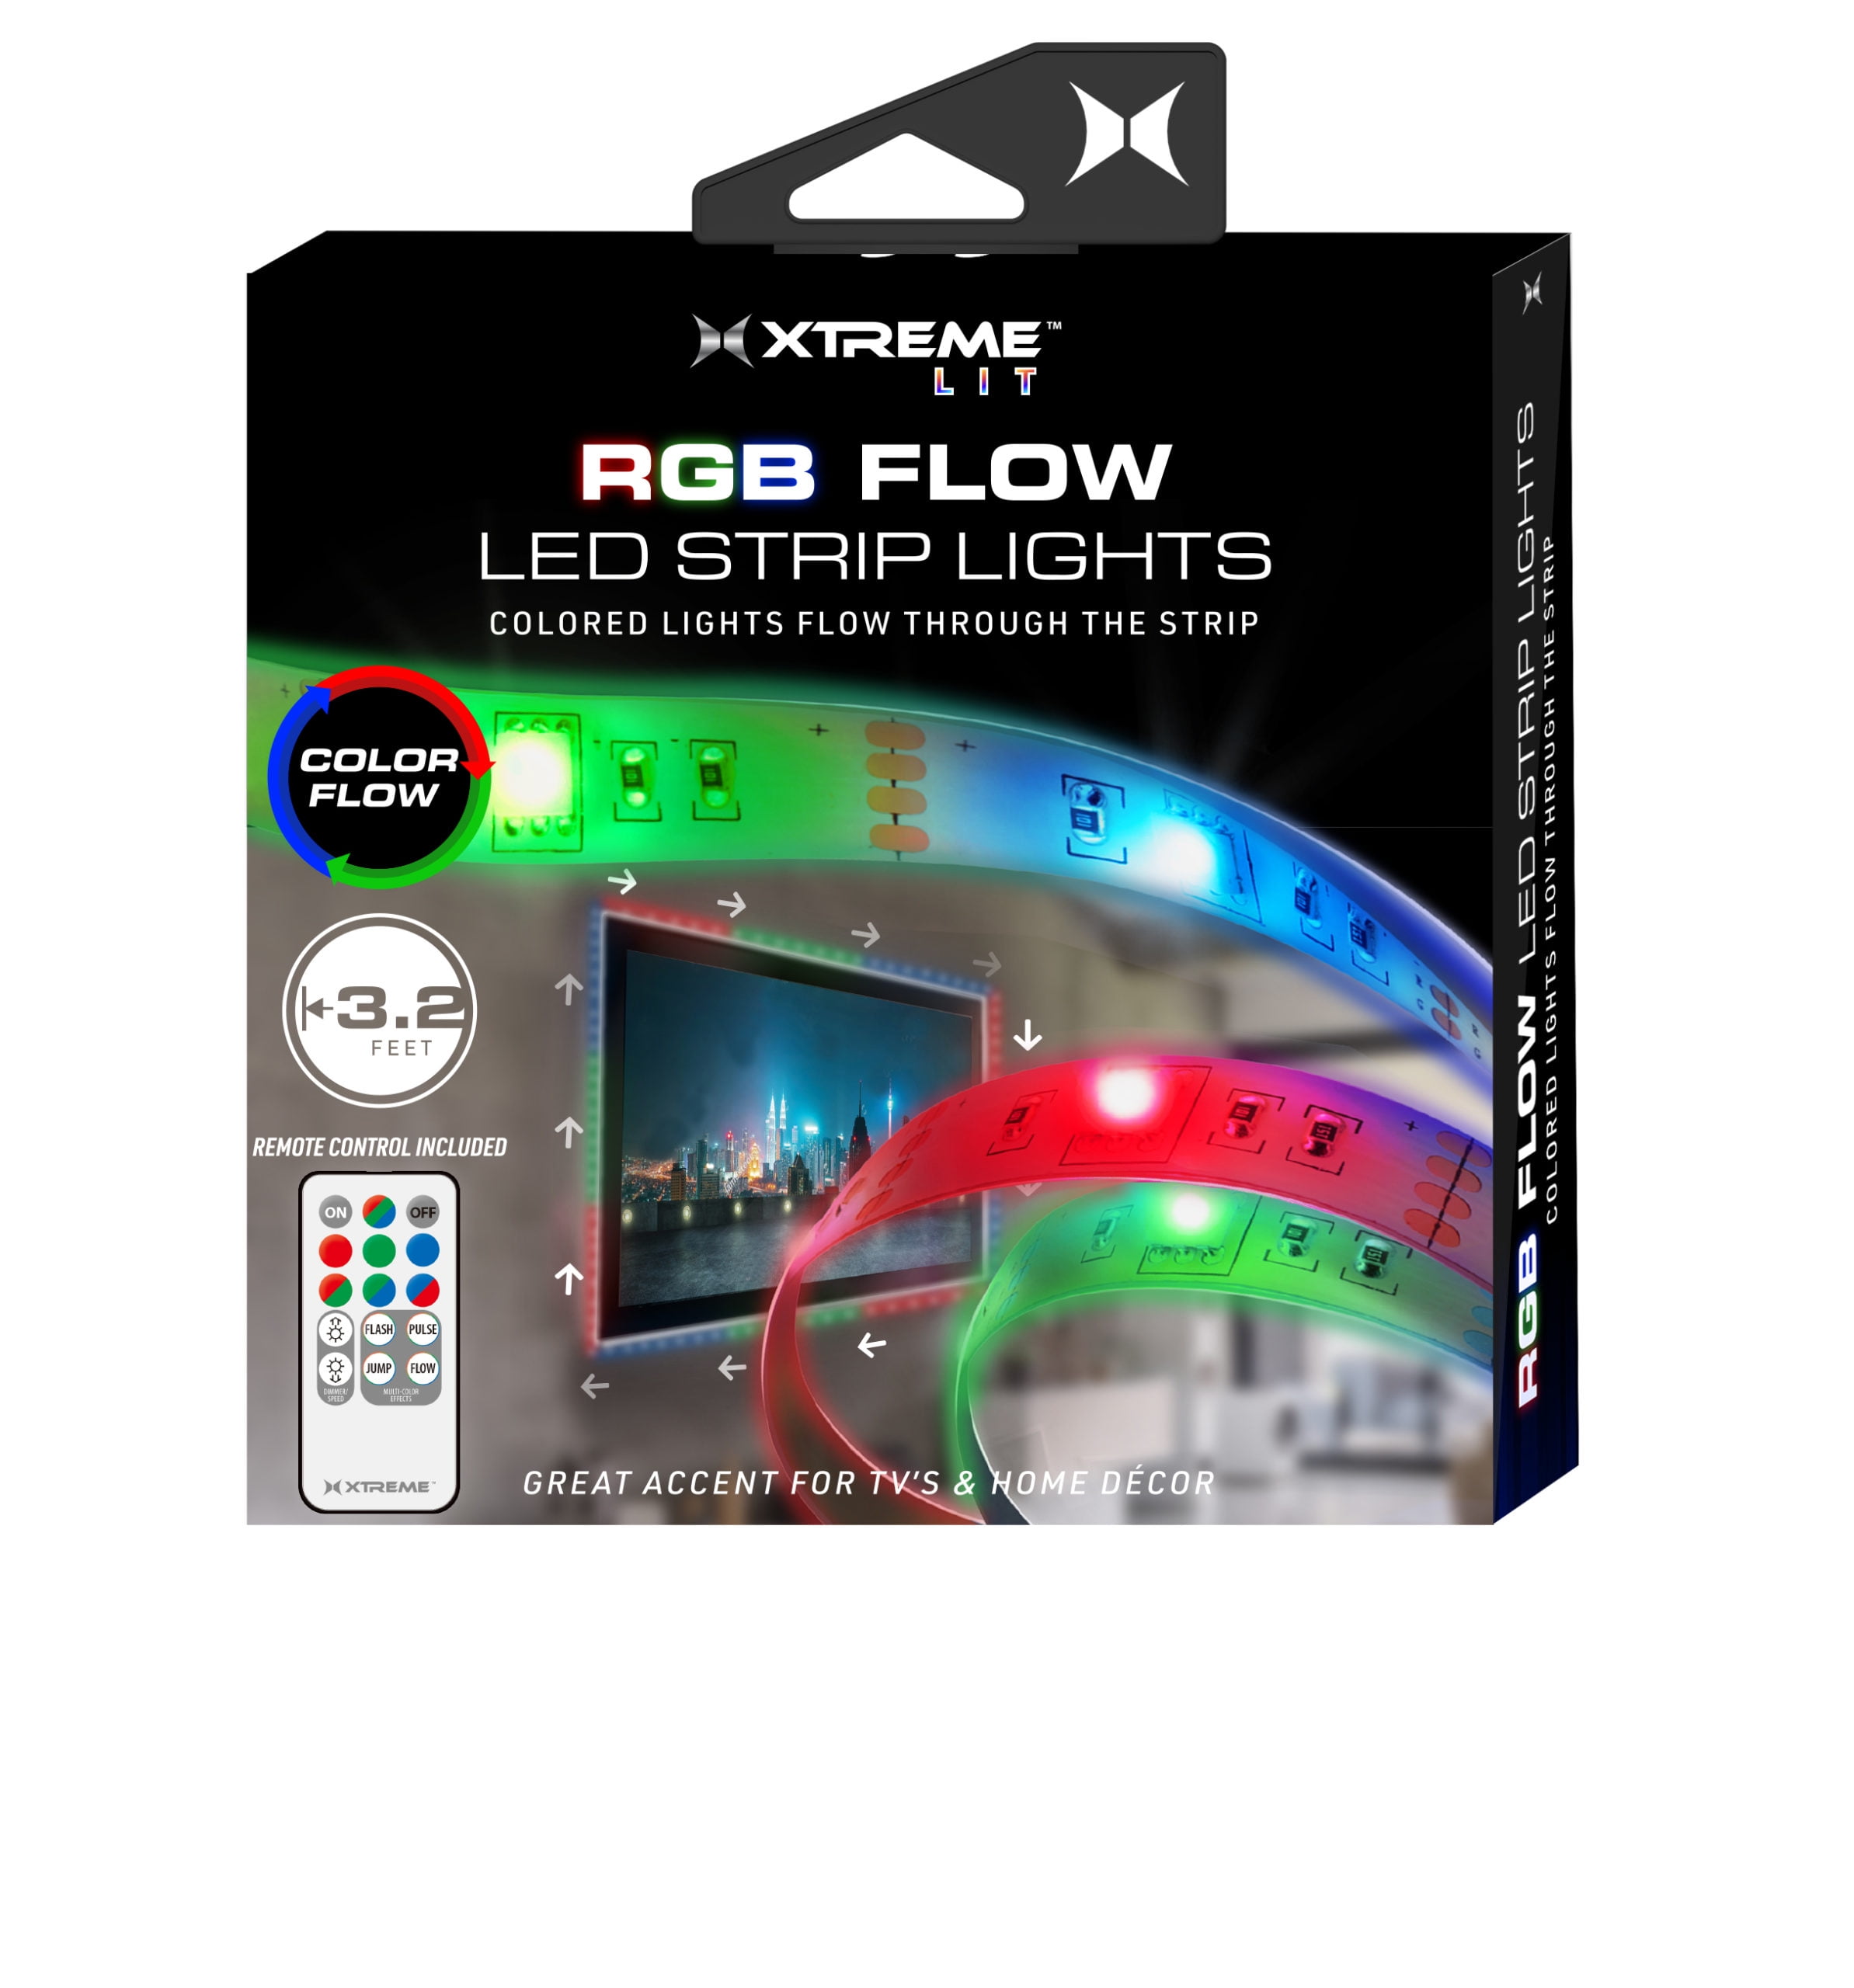 RGB Flow LED Strip Lights, 3.2ft, Color-Changing, Green, Flashing Modes, Device Backlighting, Kitchen, Bedroom, Office, Easy-To-Install, Remote Control, USB-Powered, 5-Volt Charger - Walmart.com